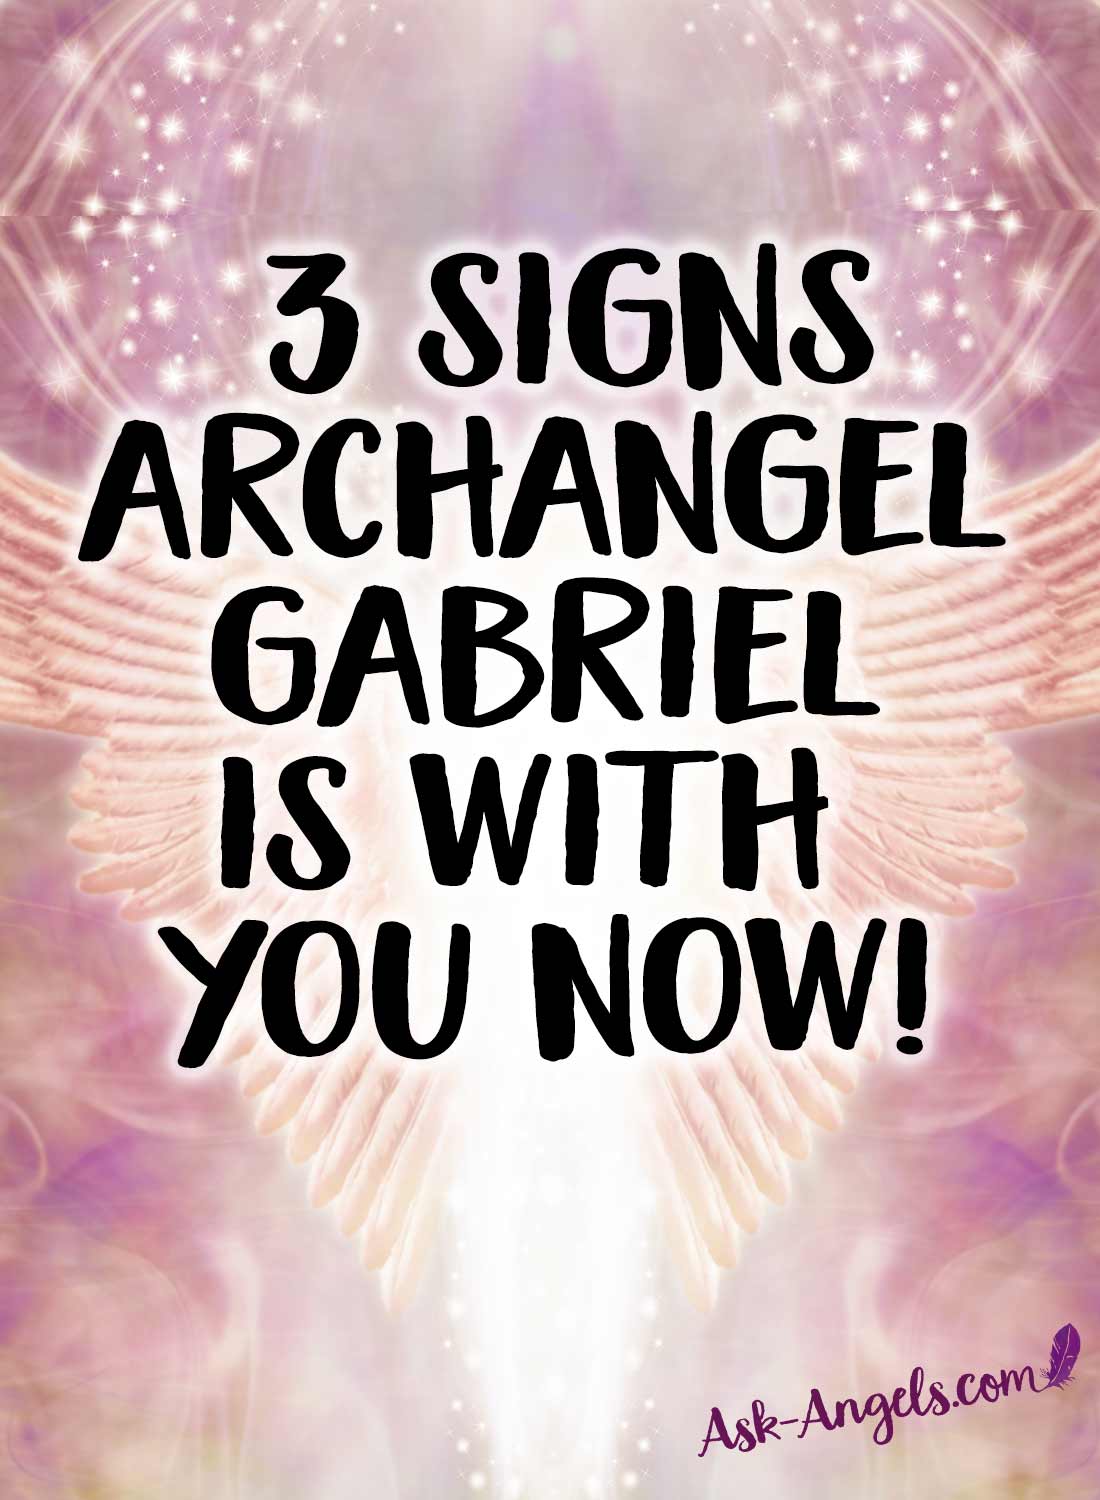 Learn the top 3 signs Gabriel is with you now!